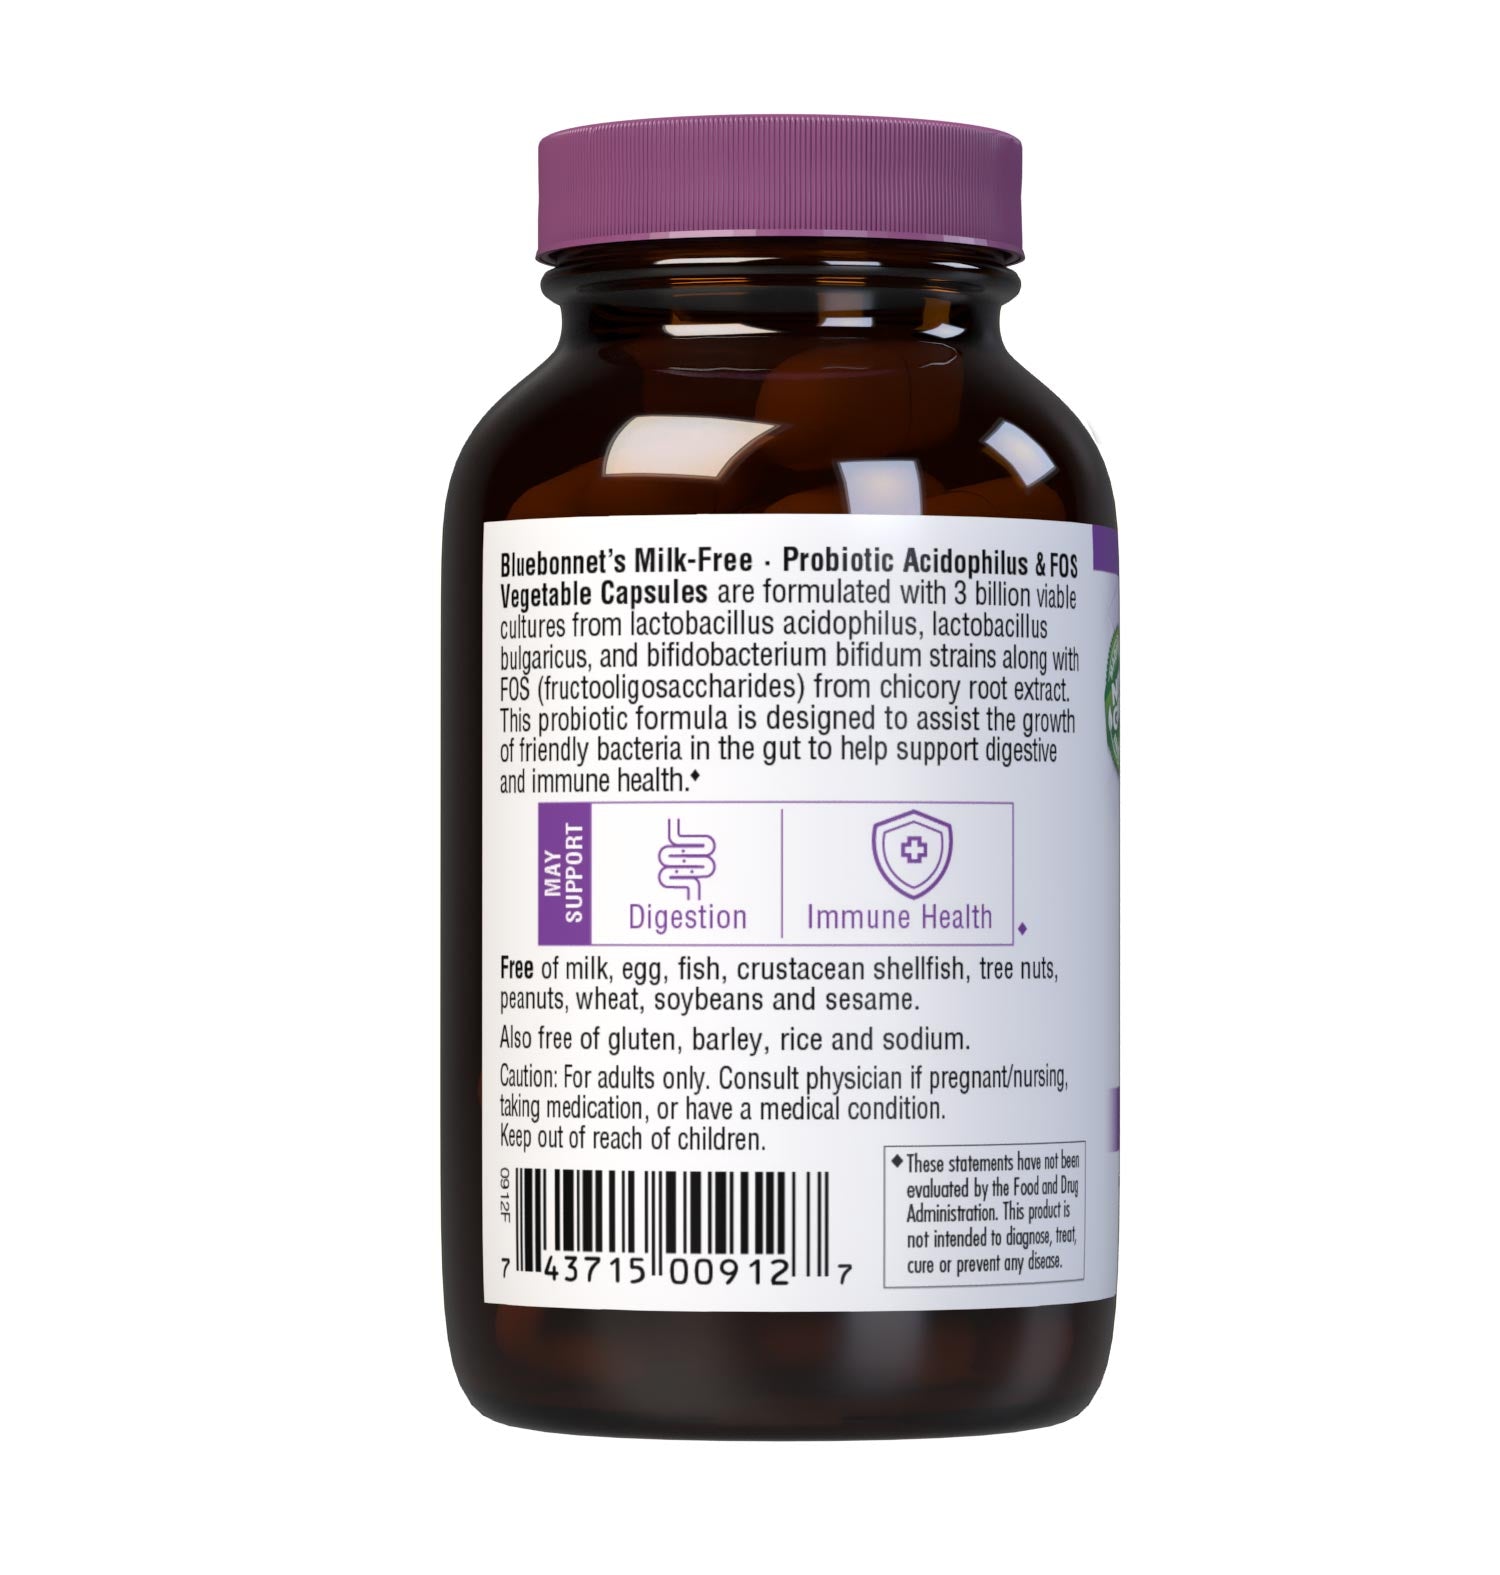 Bluebonnet’s Milk-Free Probiotic Acidophilus & FOS 100 Vegetable Capsules are formulated with over three billion viable cultures from lactobacillus acidophilus, lactobacillus bulgaricus, bifidobacterium bifidum strains along with FOS (fructooligosaccharides) from chicory root extract. This probiotic formula is designed to assist the growth of friendly bacteria in the gut to help support digestive and immune health. Description panel. #size_100 count